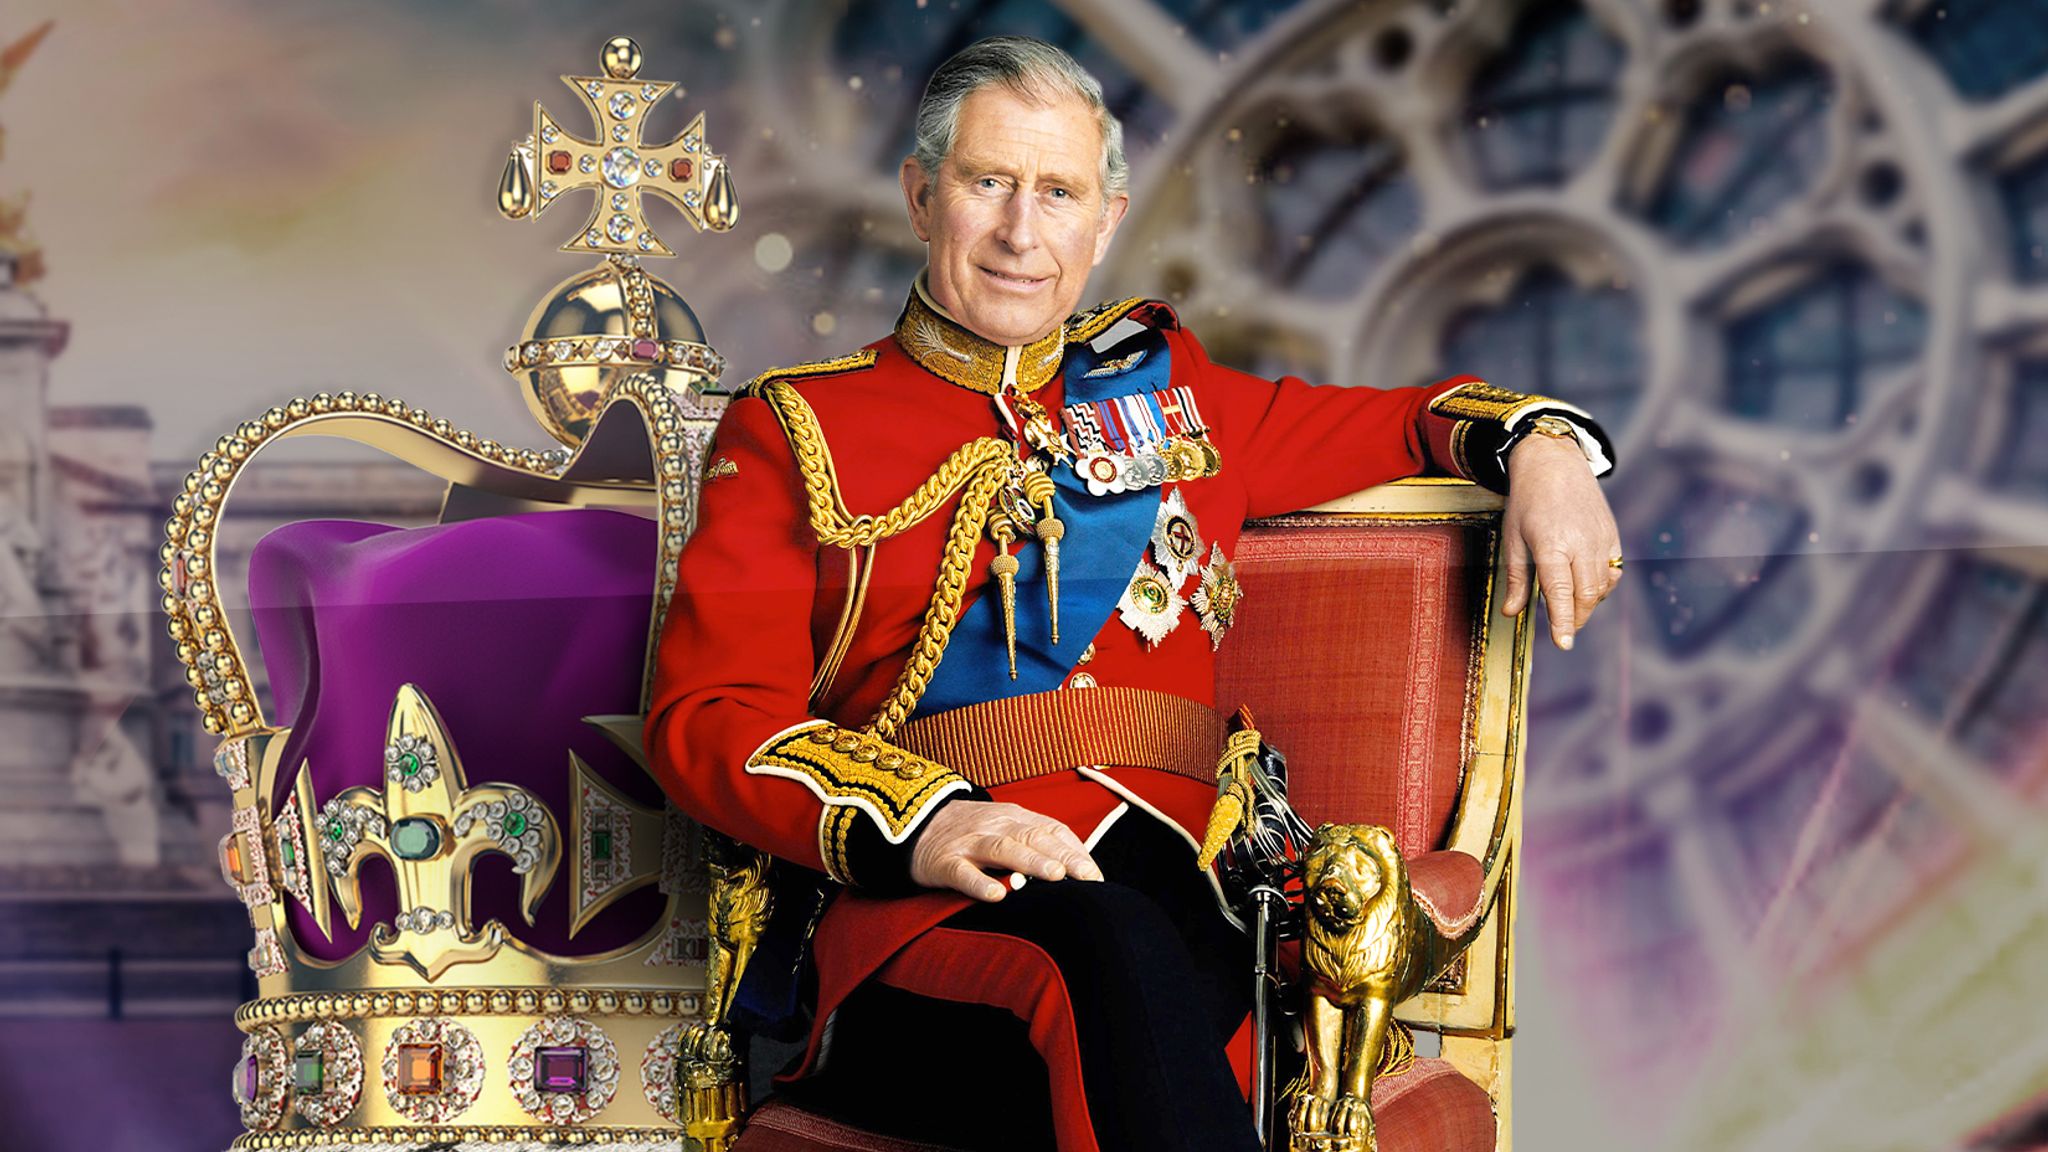 King Charles III's coronation: The biggest moments of the historic event -  Good Morning America